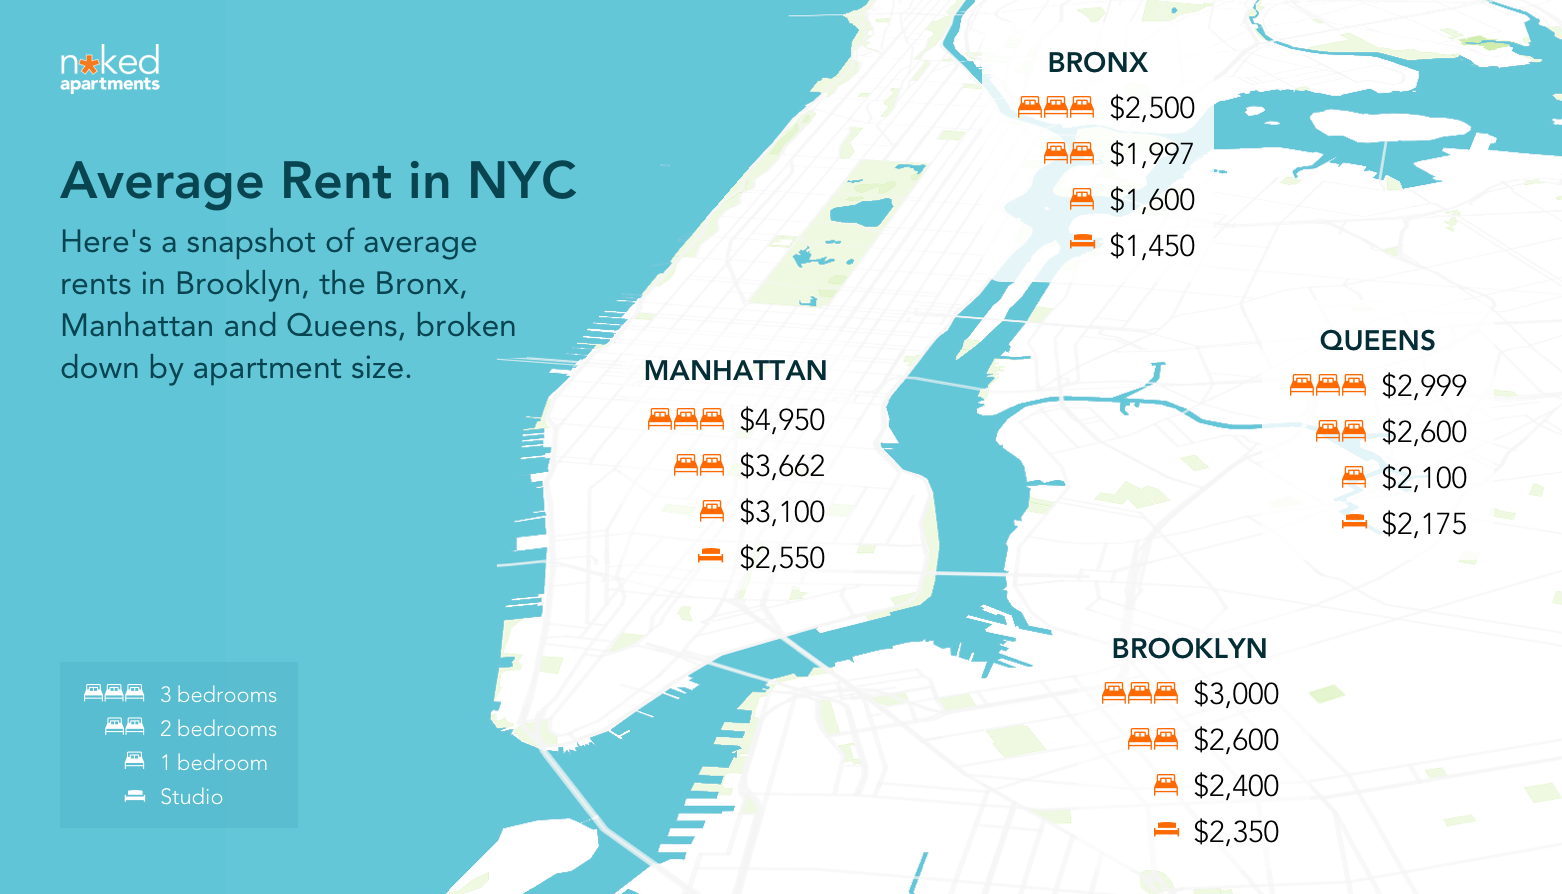 Average Rent NYC: Here's What You'll Pay in Rent | Naked Apartments average rent for a 3 bedroom house in texas